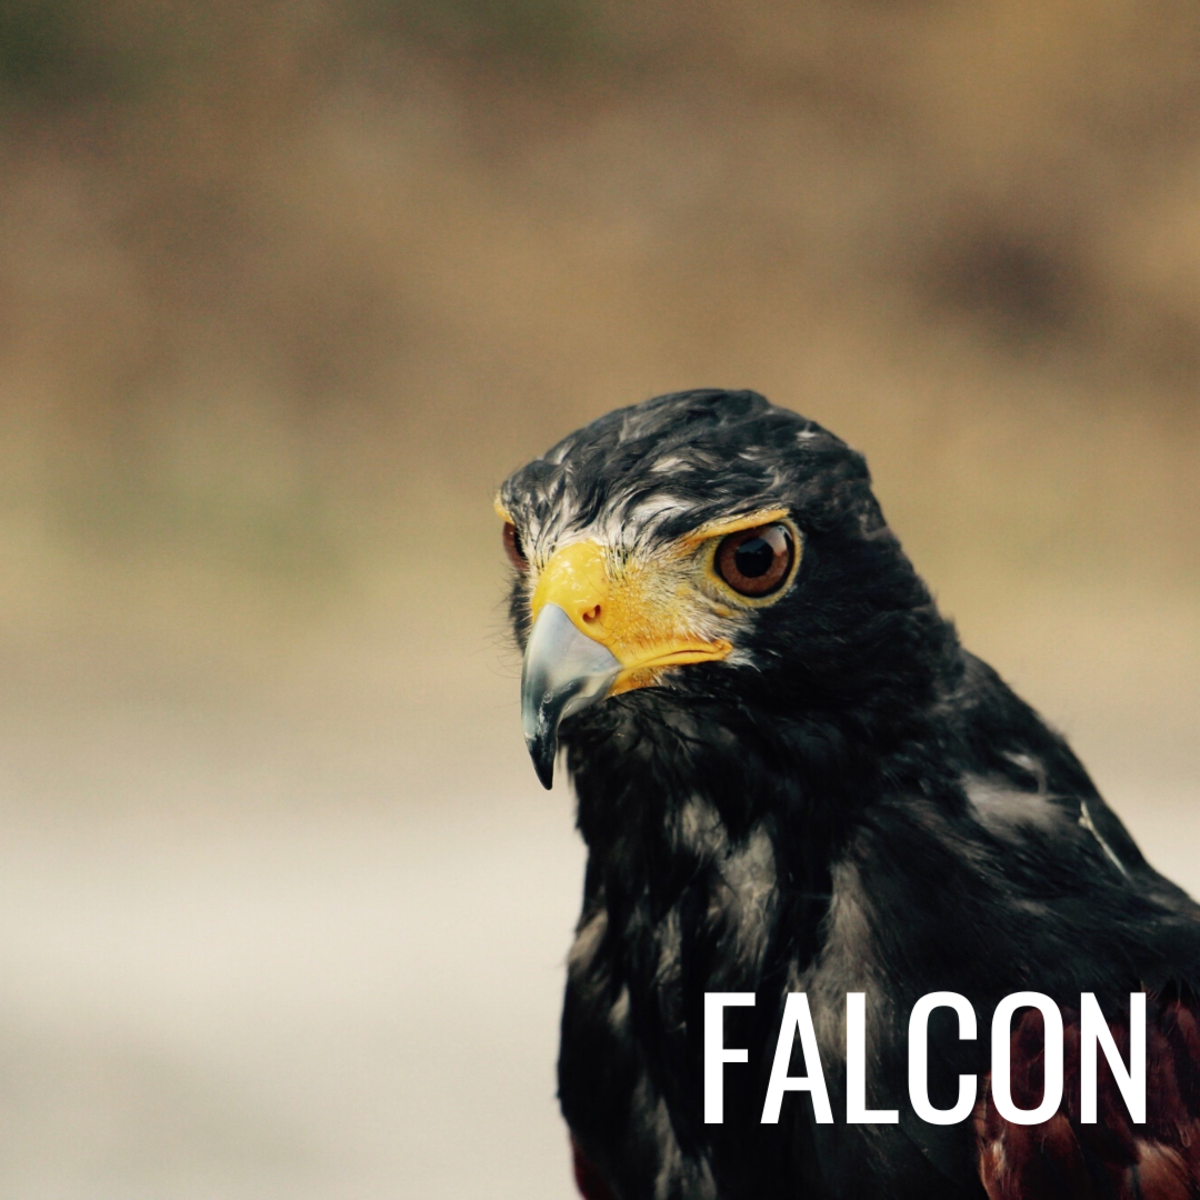 Falcons represent endurance, survival, and nobility.